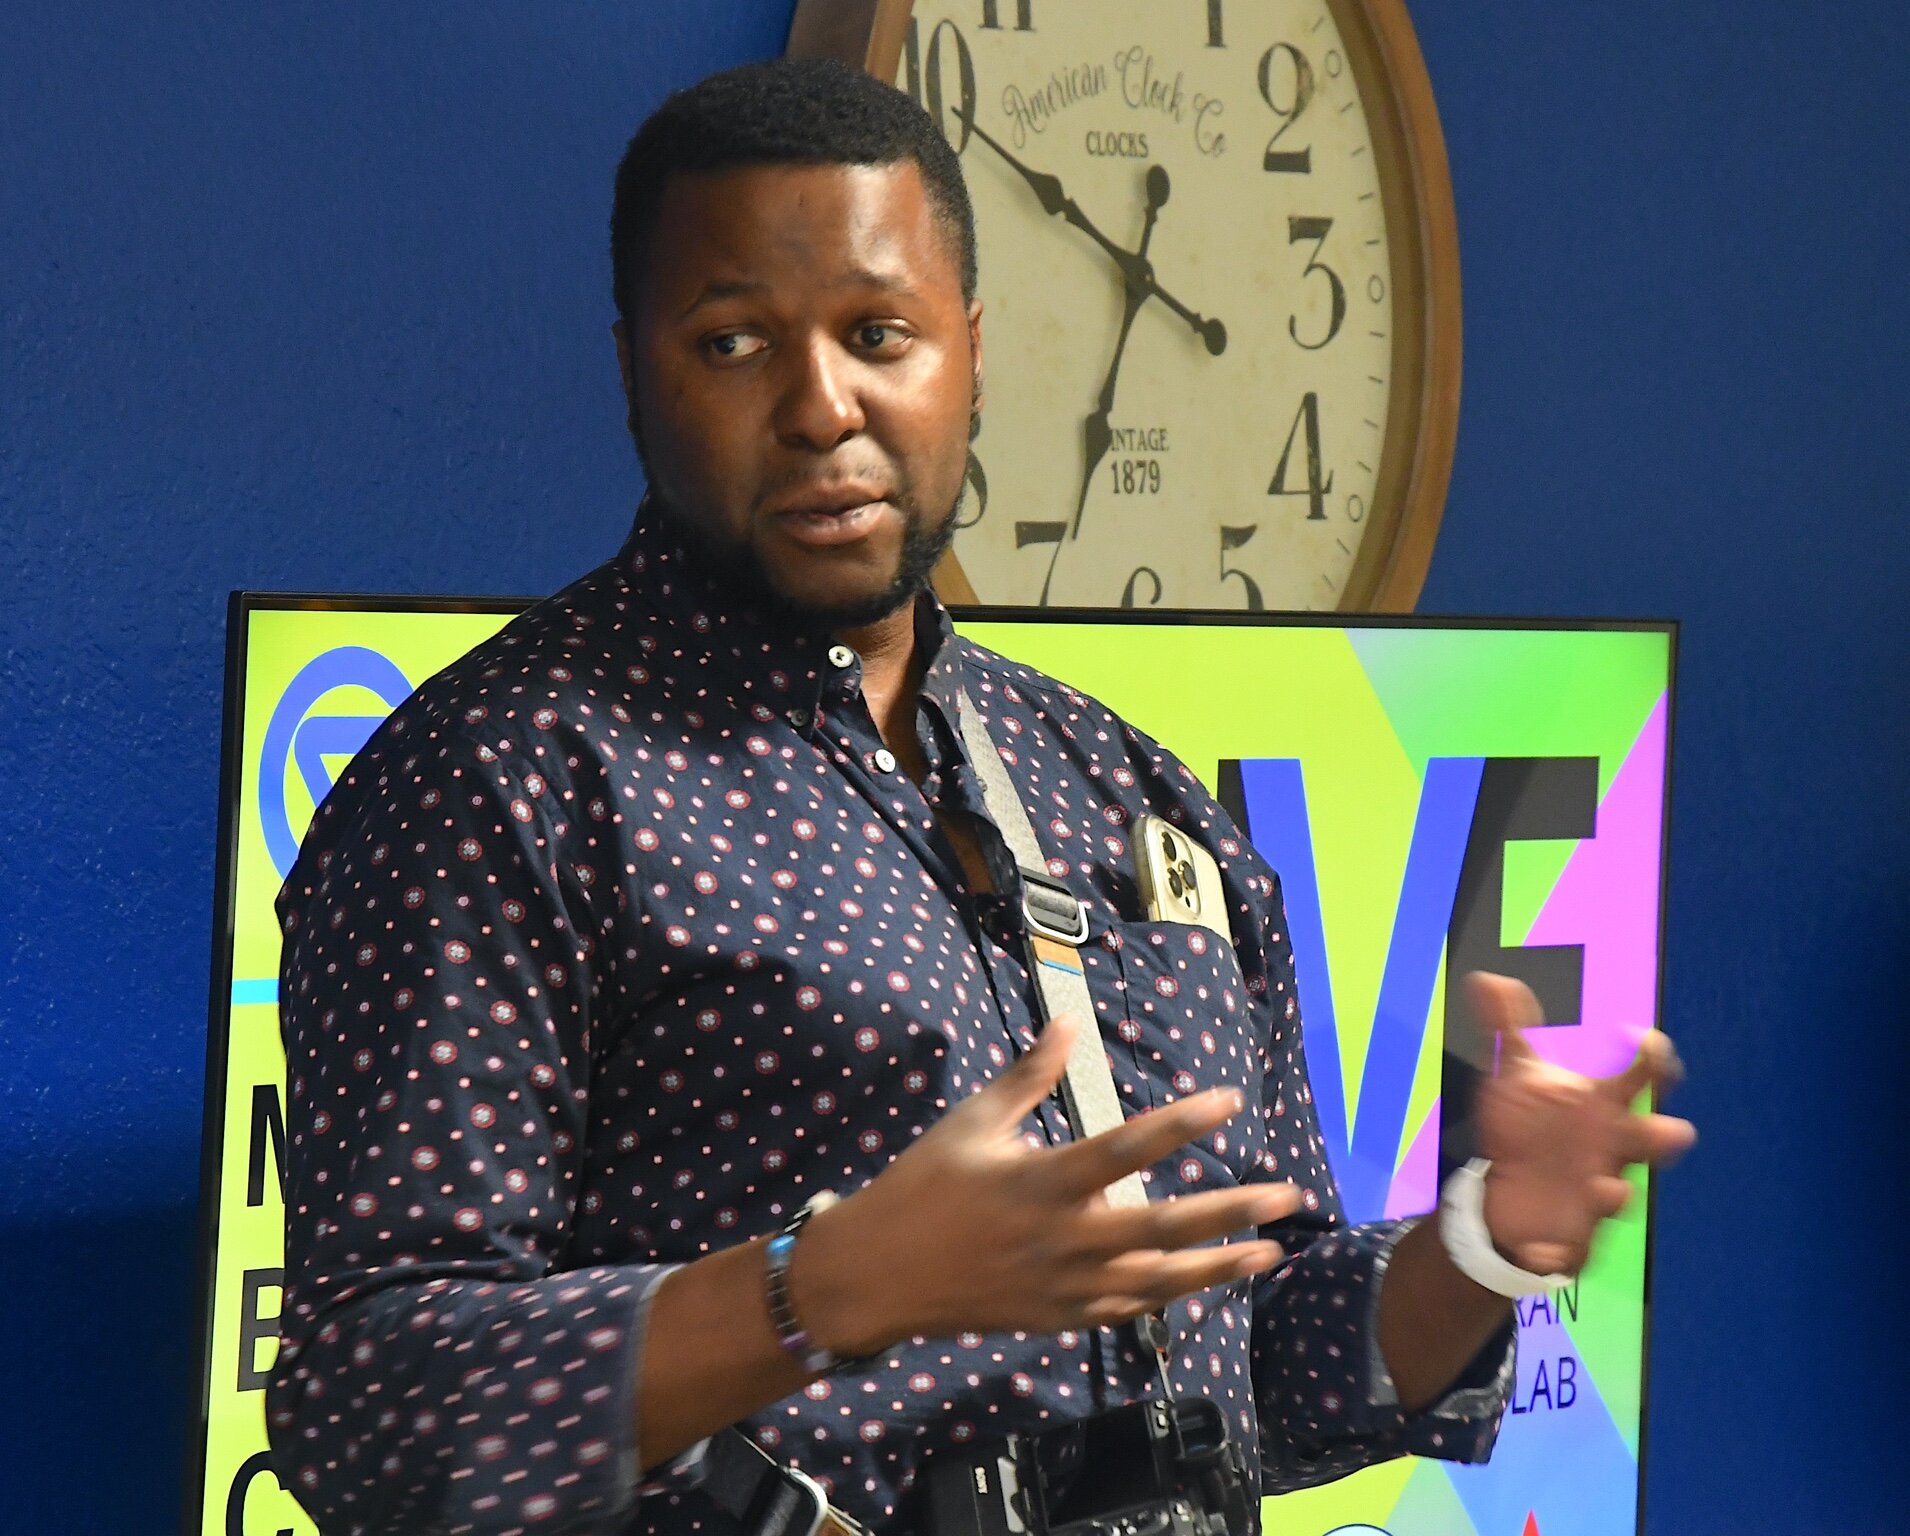 Isaiah Dillard, a digital content creator, marketer, and brand specialist, speaks during the opening session of the Michigan Veteran Entrepreneur Lab session in Battle Creek.